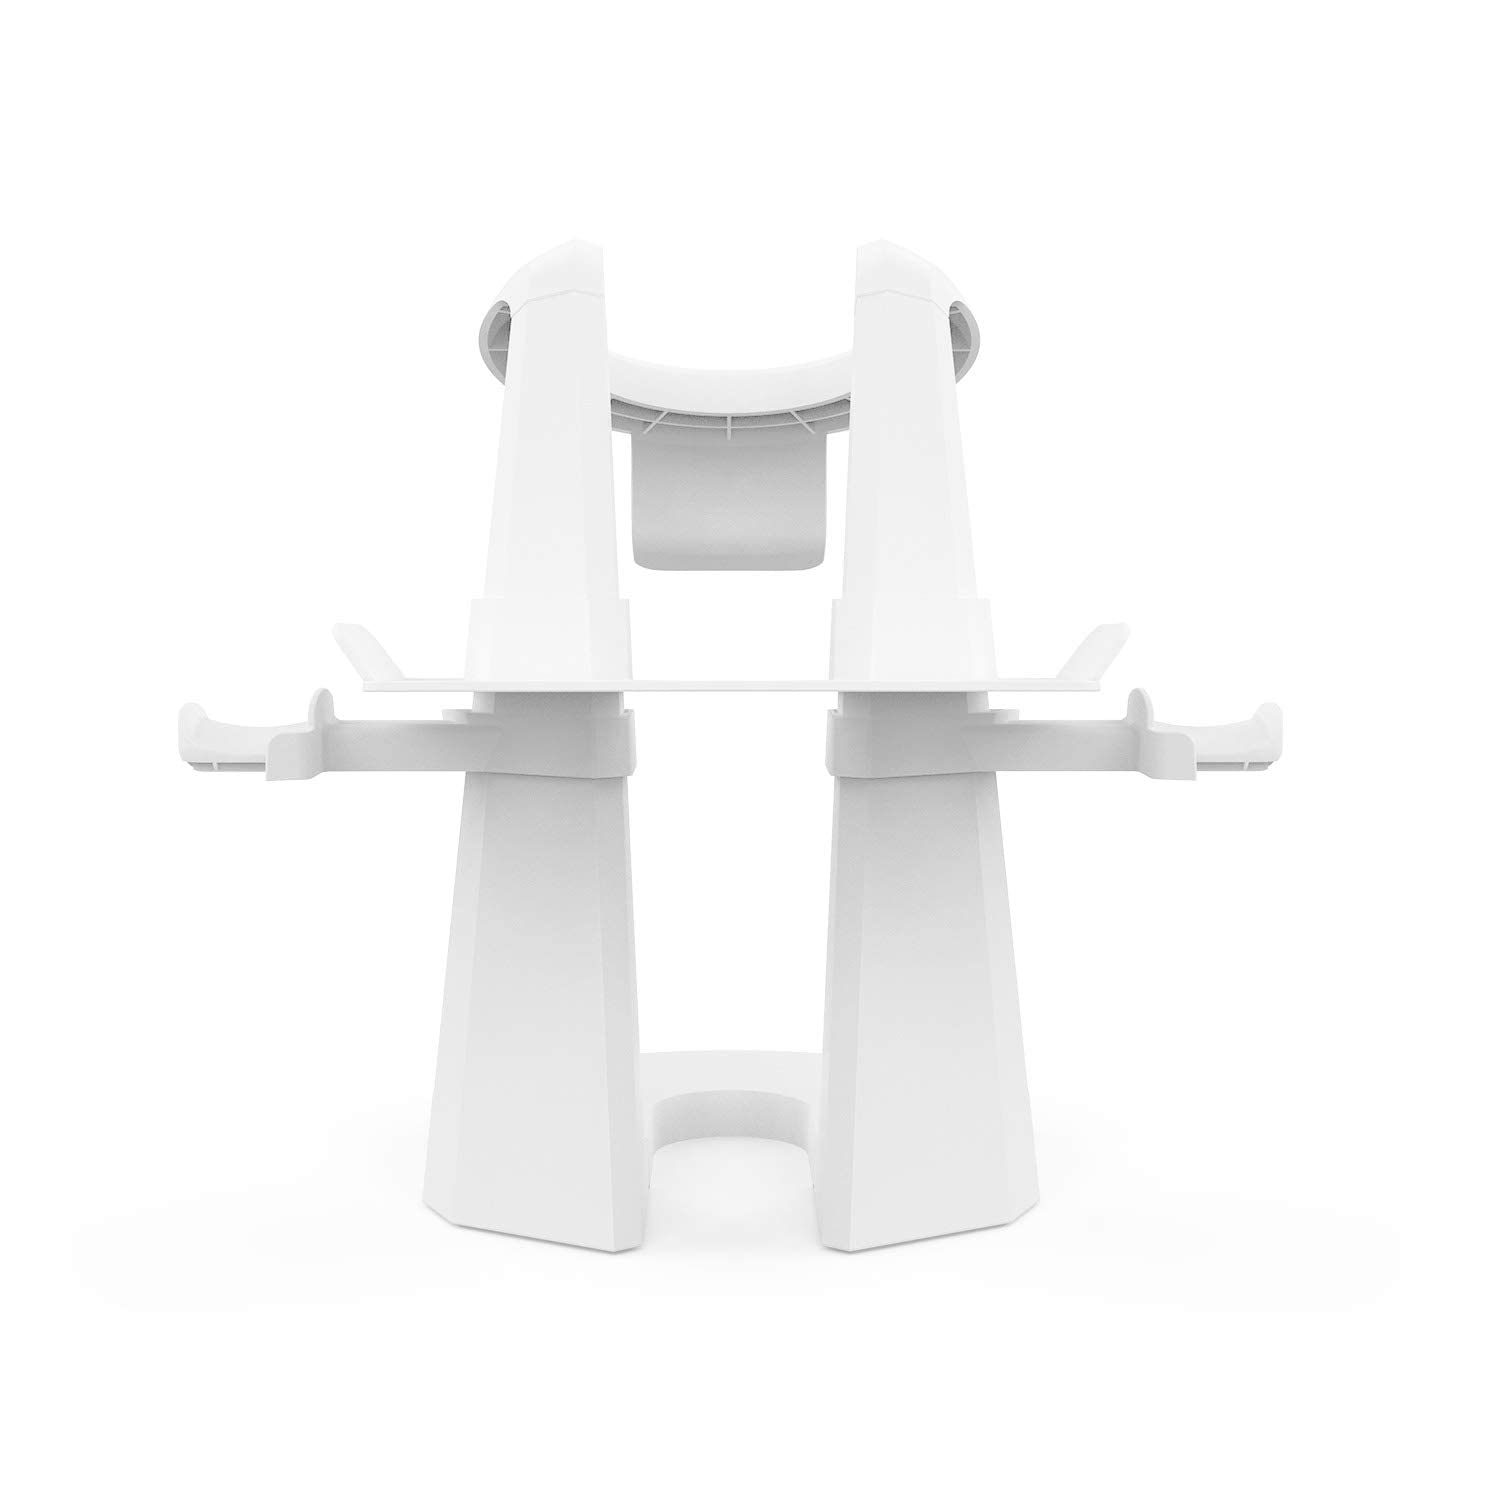 VR Headset Display Holder And Controller Mount Station For Quest 2